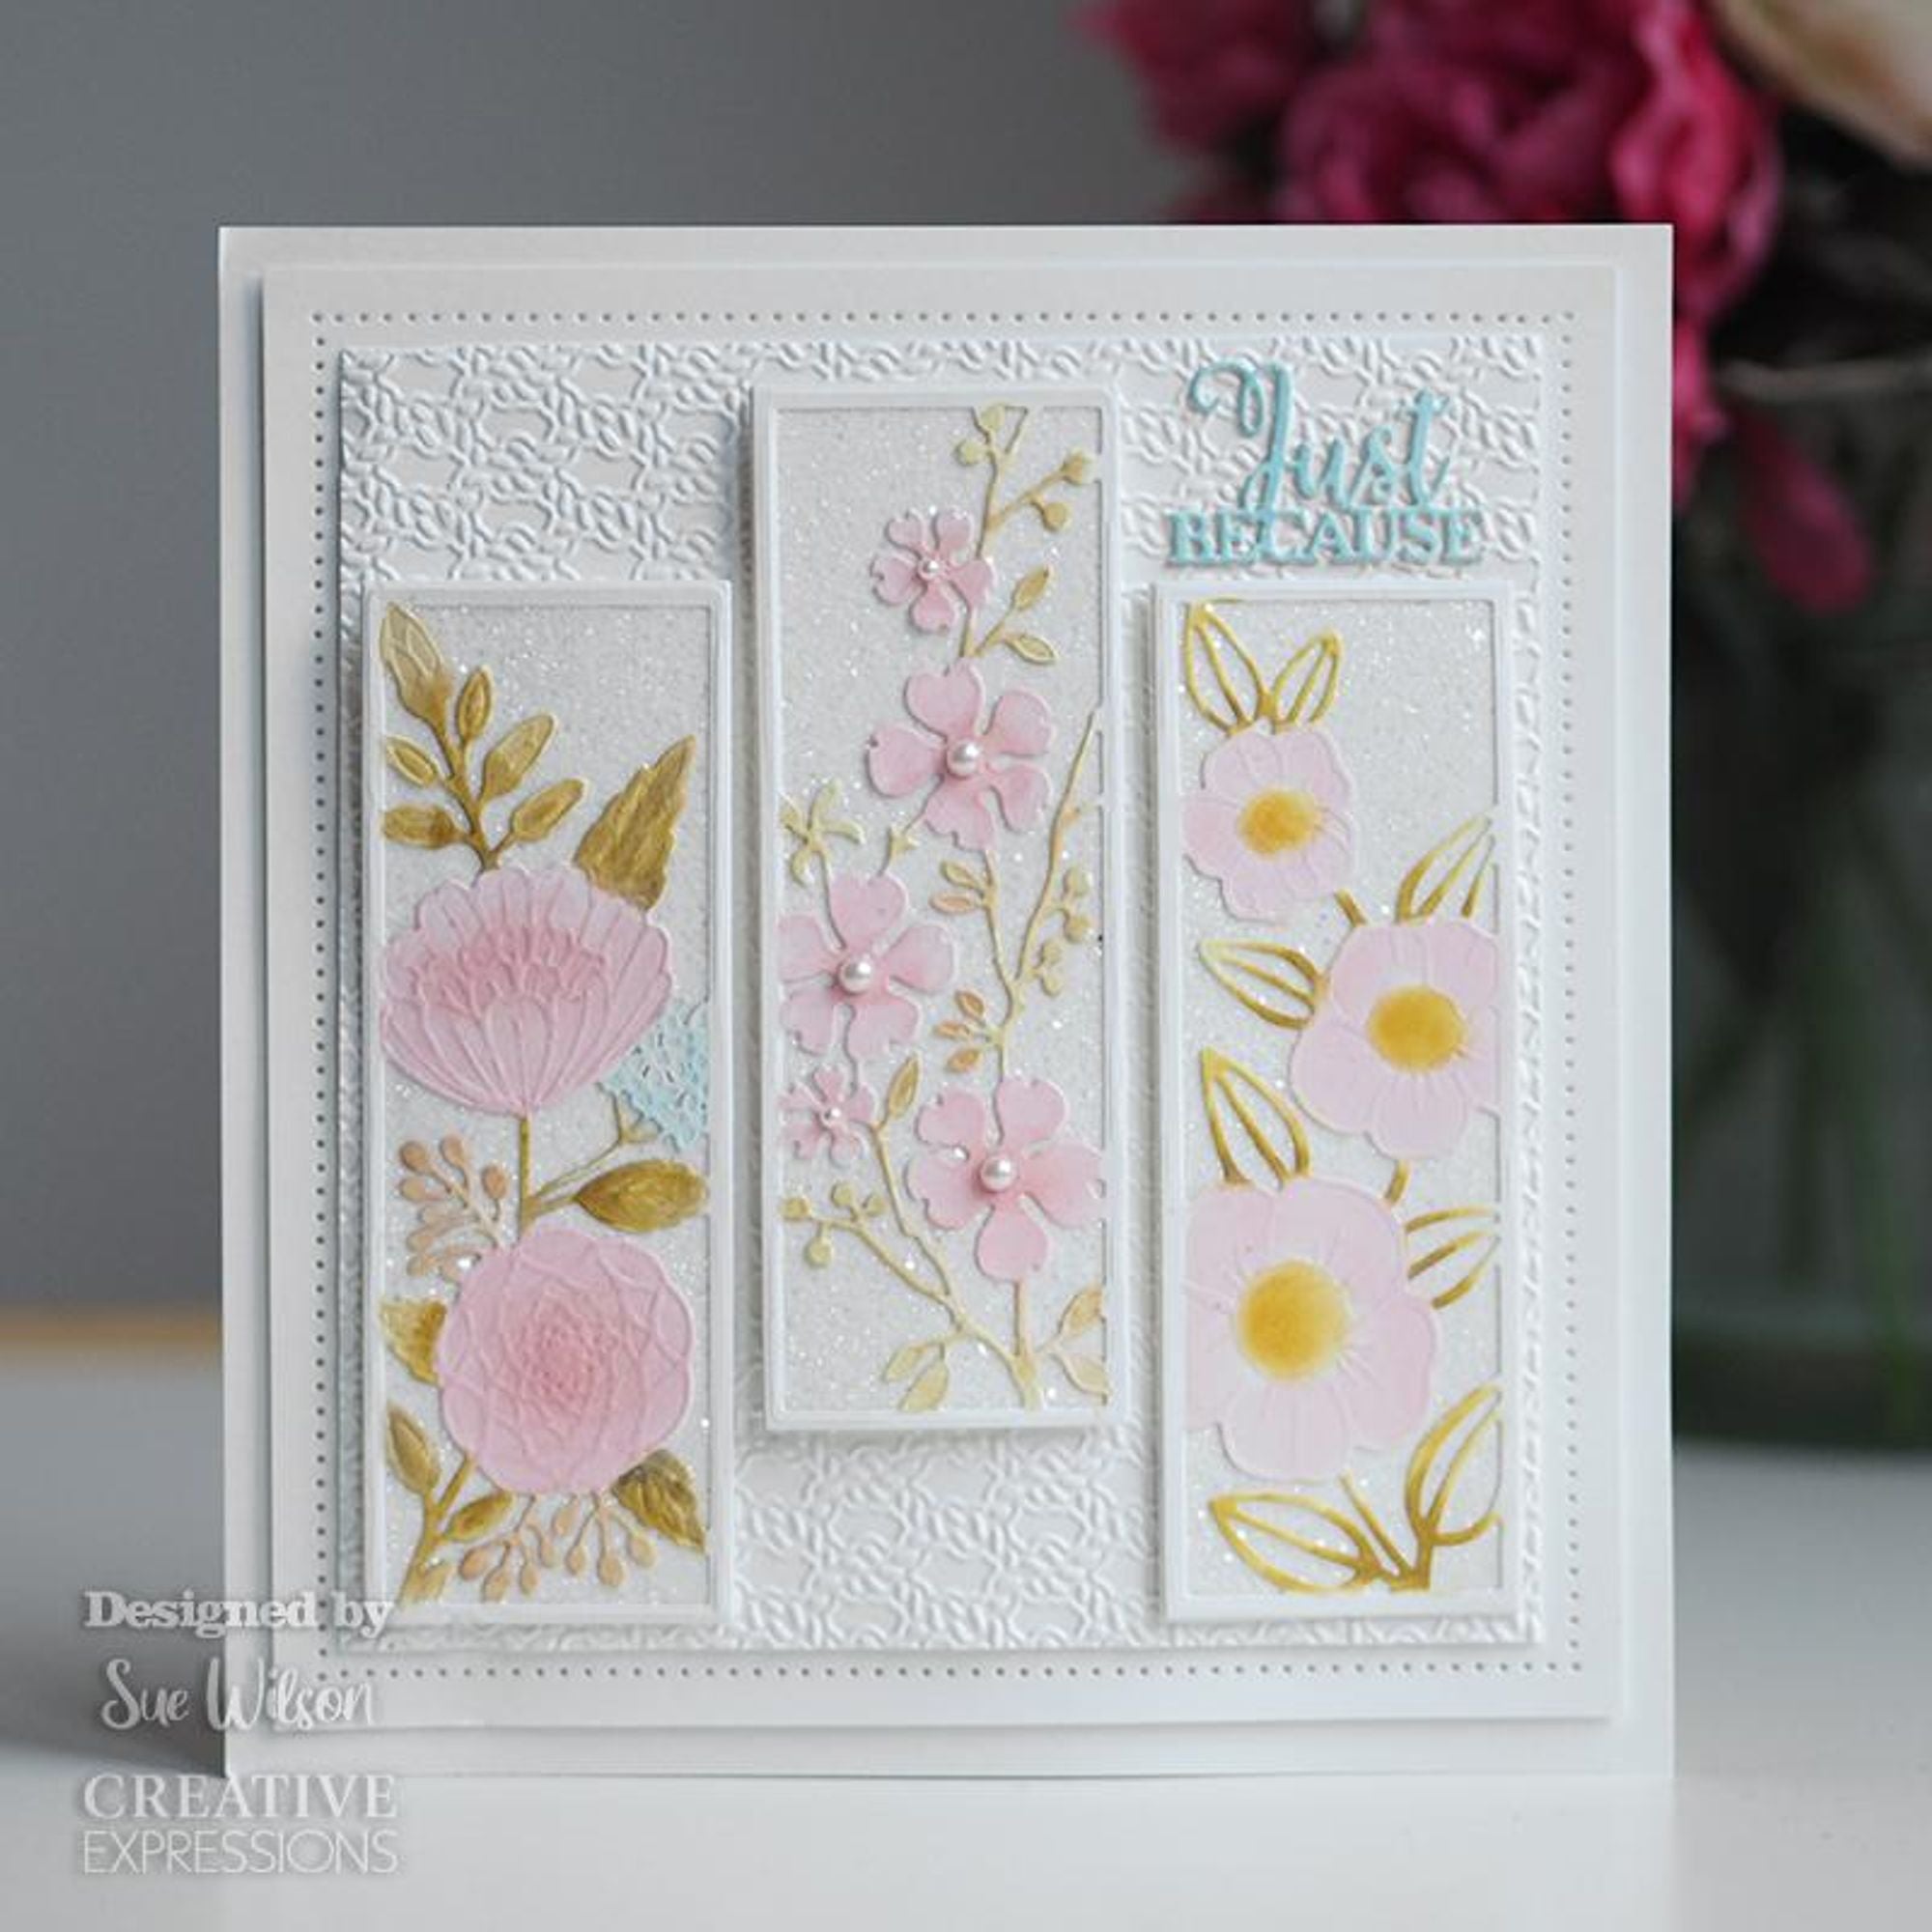 Creative Expressions Sue Wilson Floral Panels Dogwood Craft Die